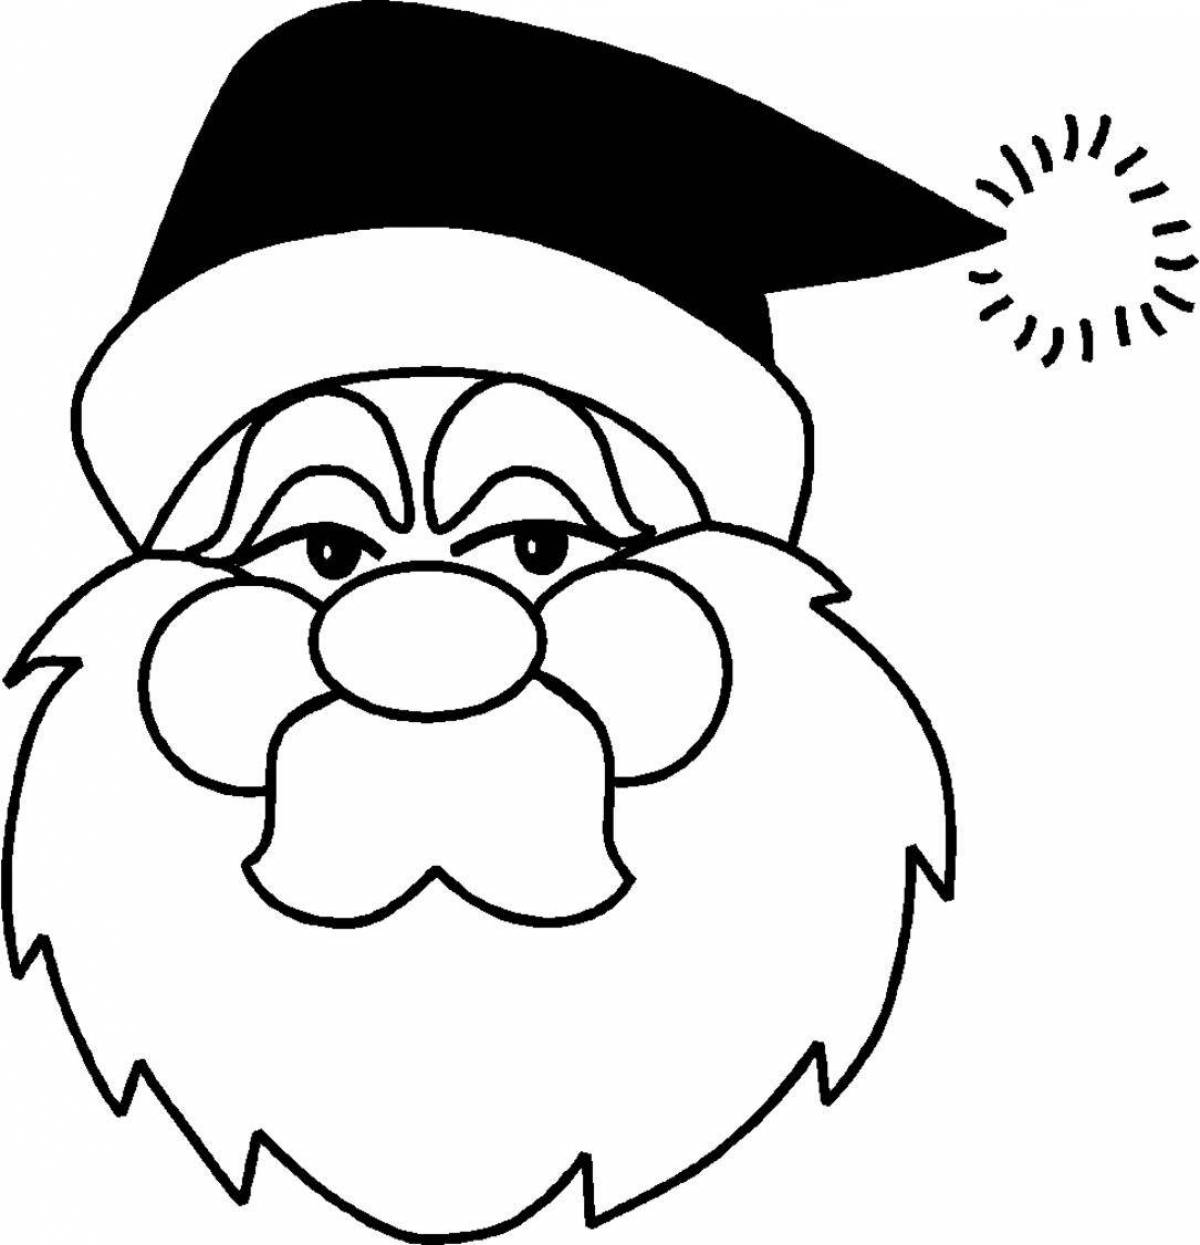 Coloring the face of a cheerful santa claus